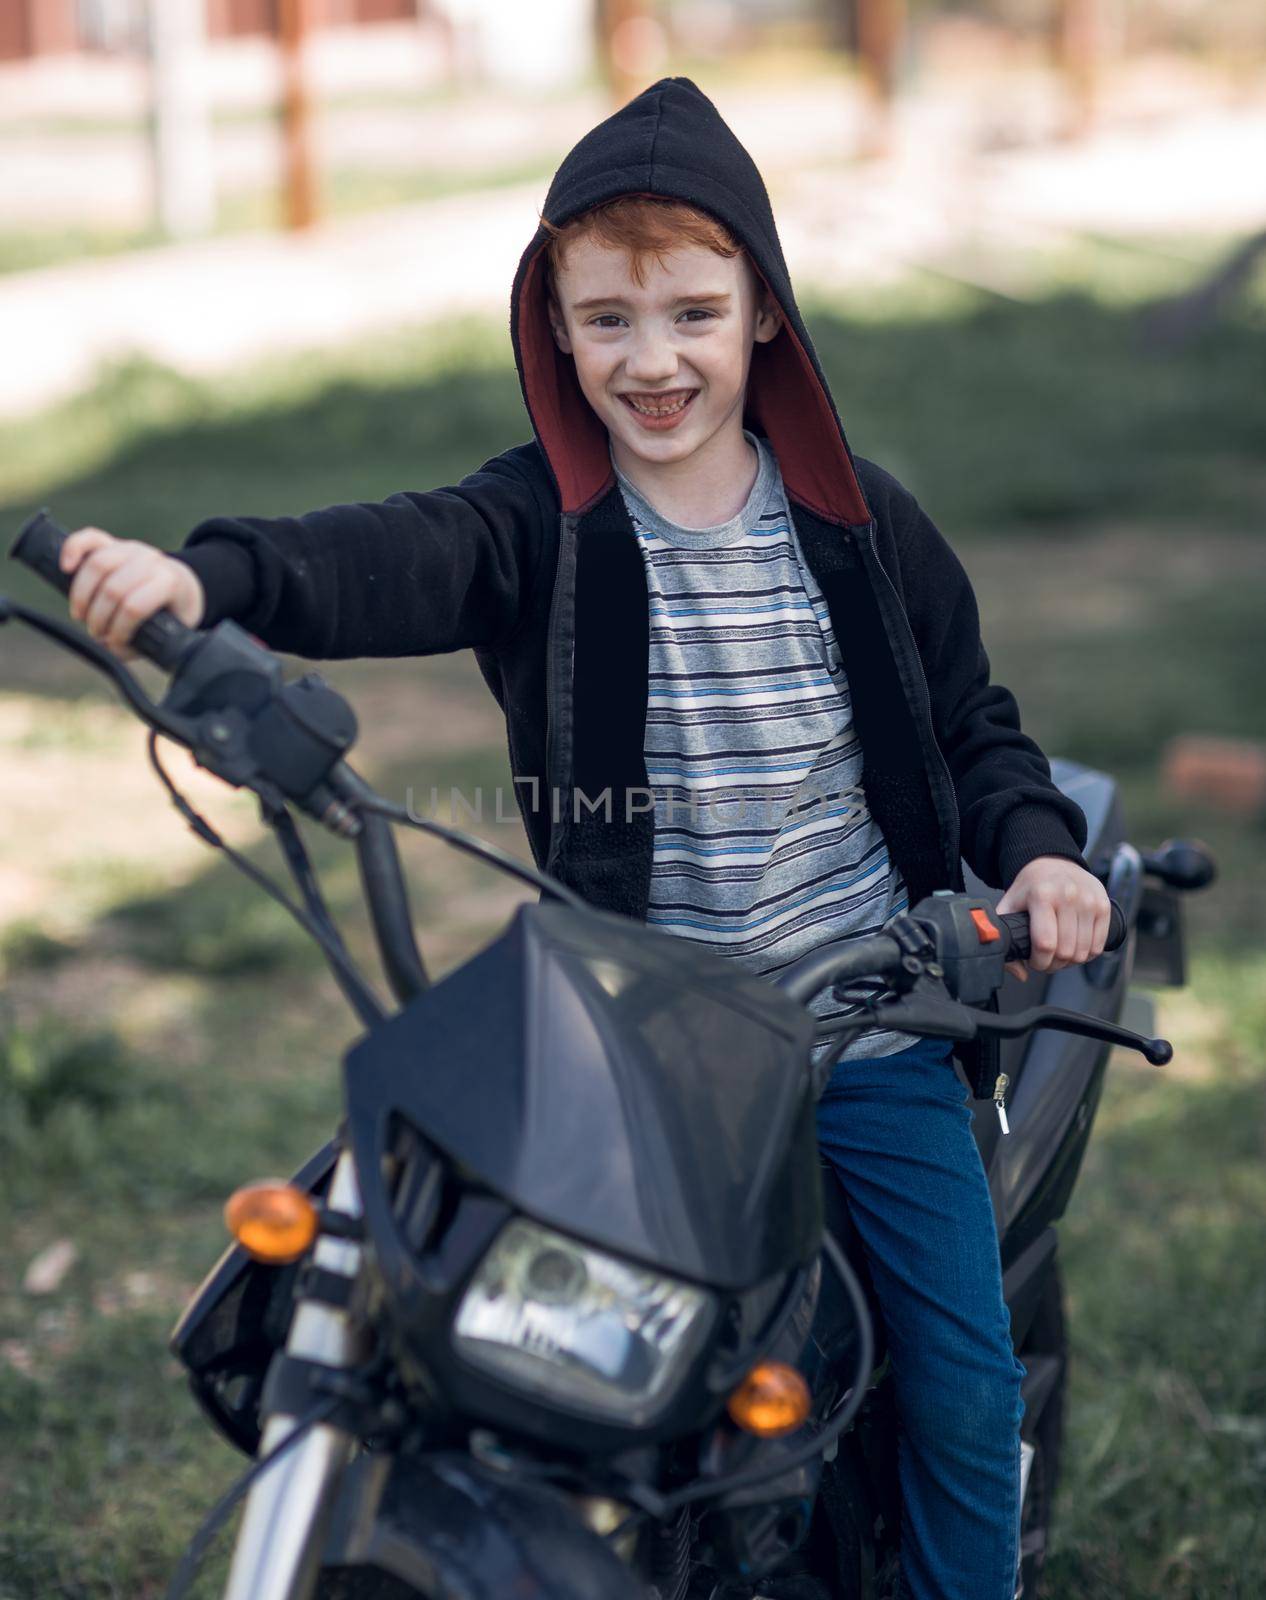 smiling little biker riding a motorcycle by asdf